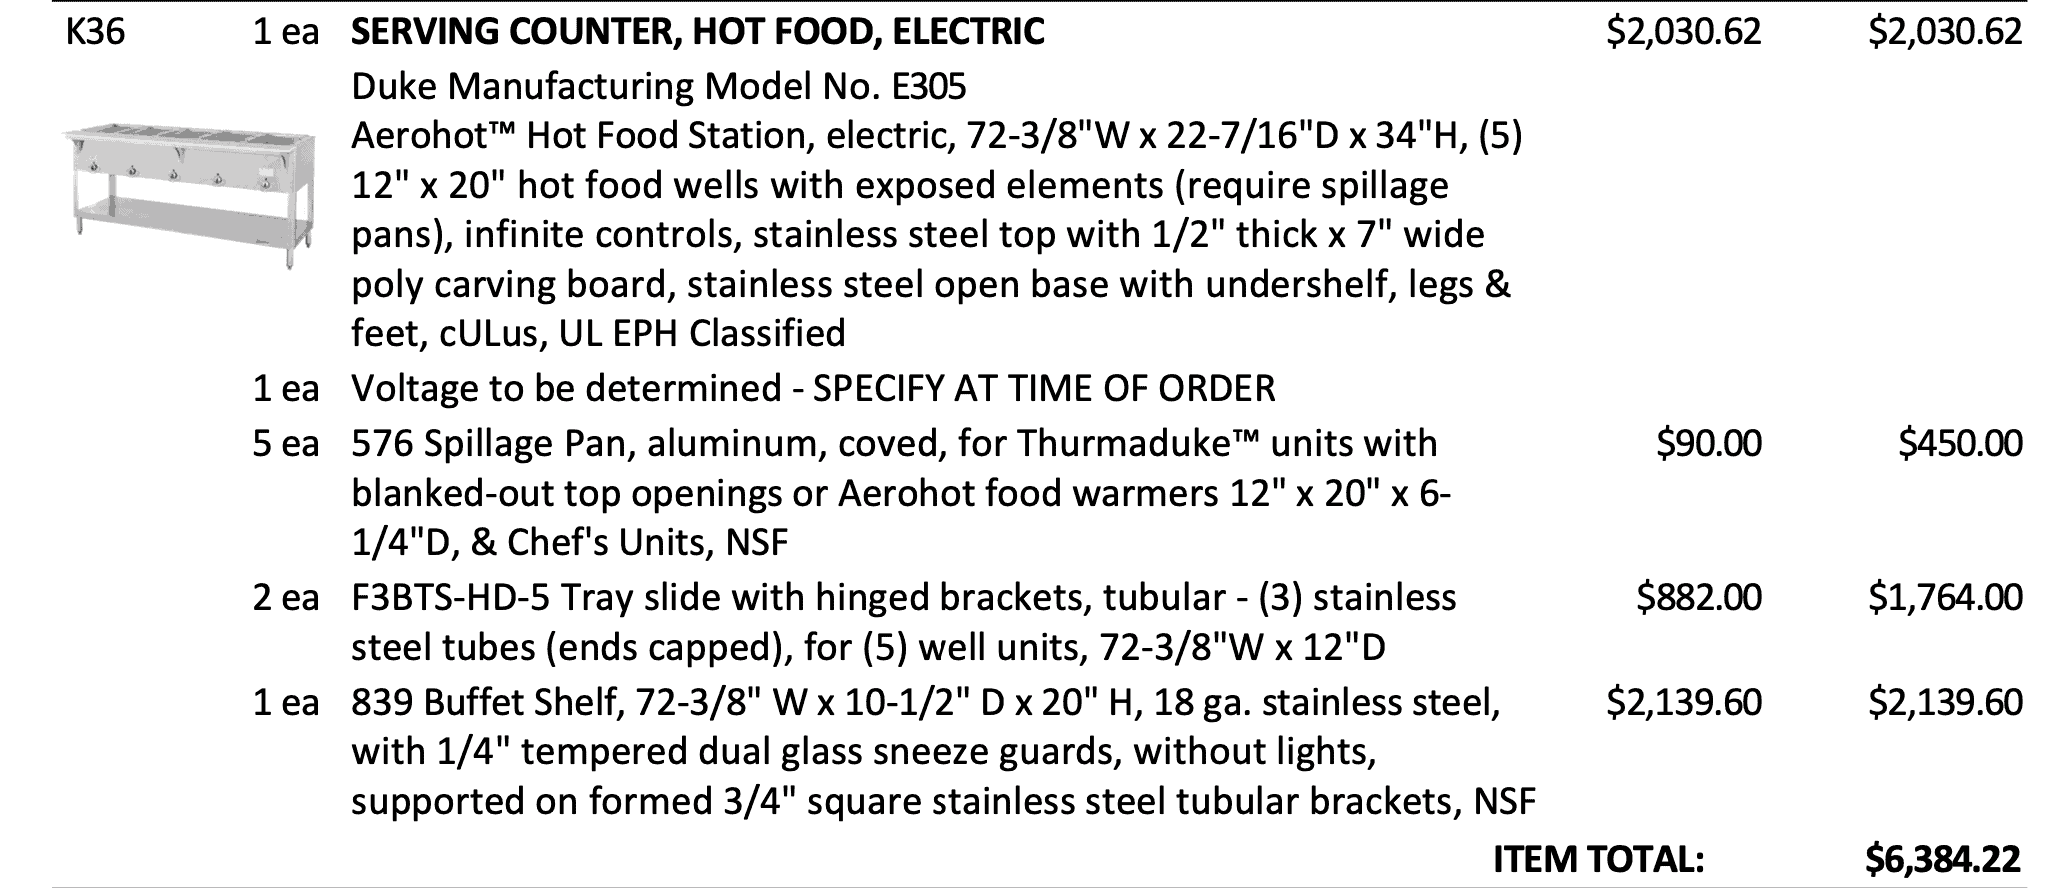 Serving Counter, Hot Food (Electric)